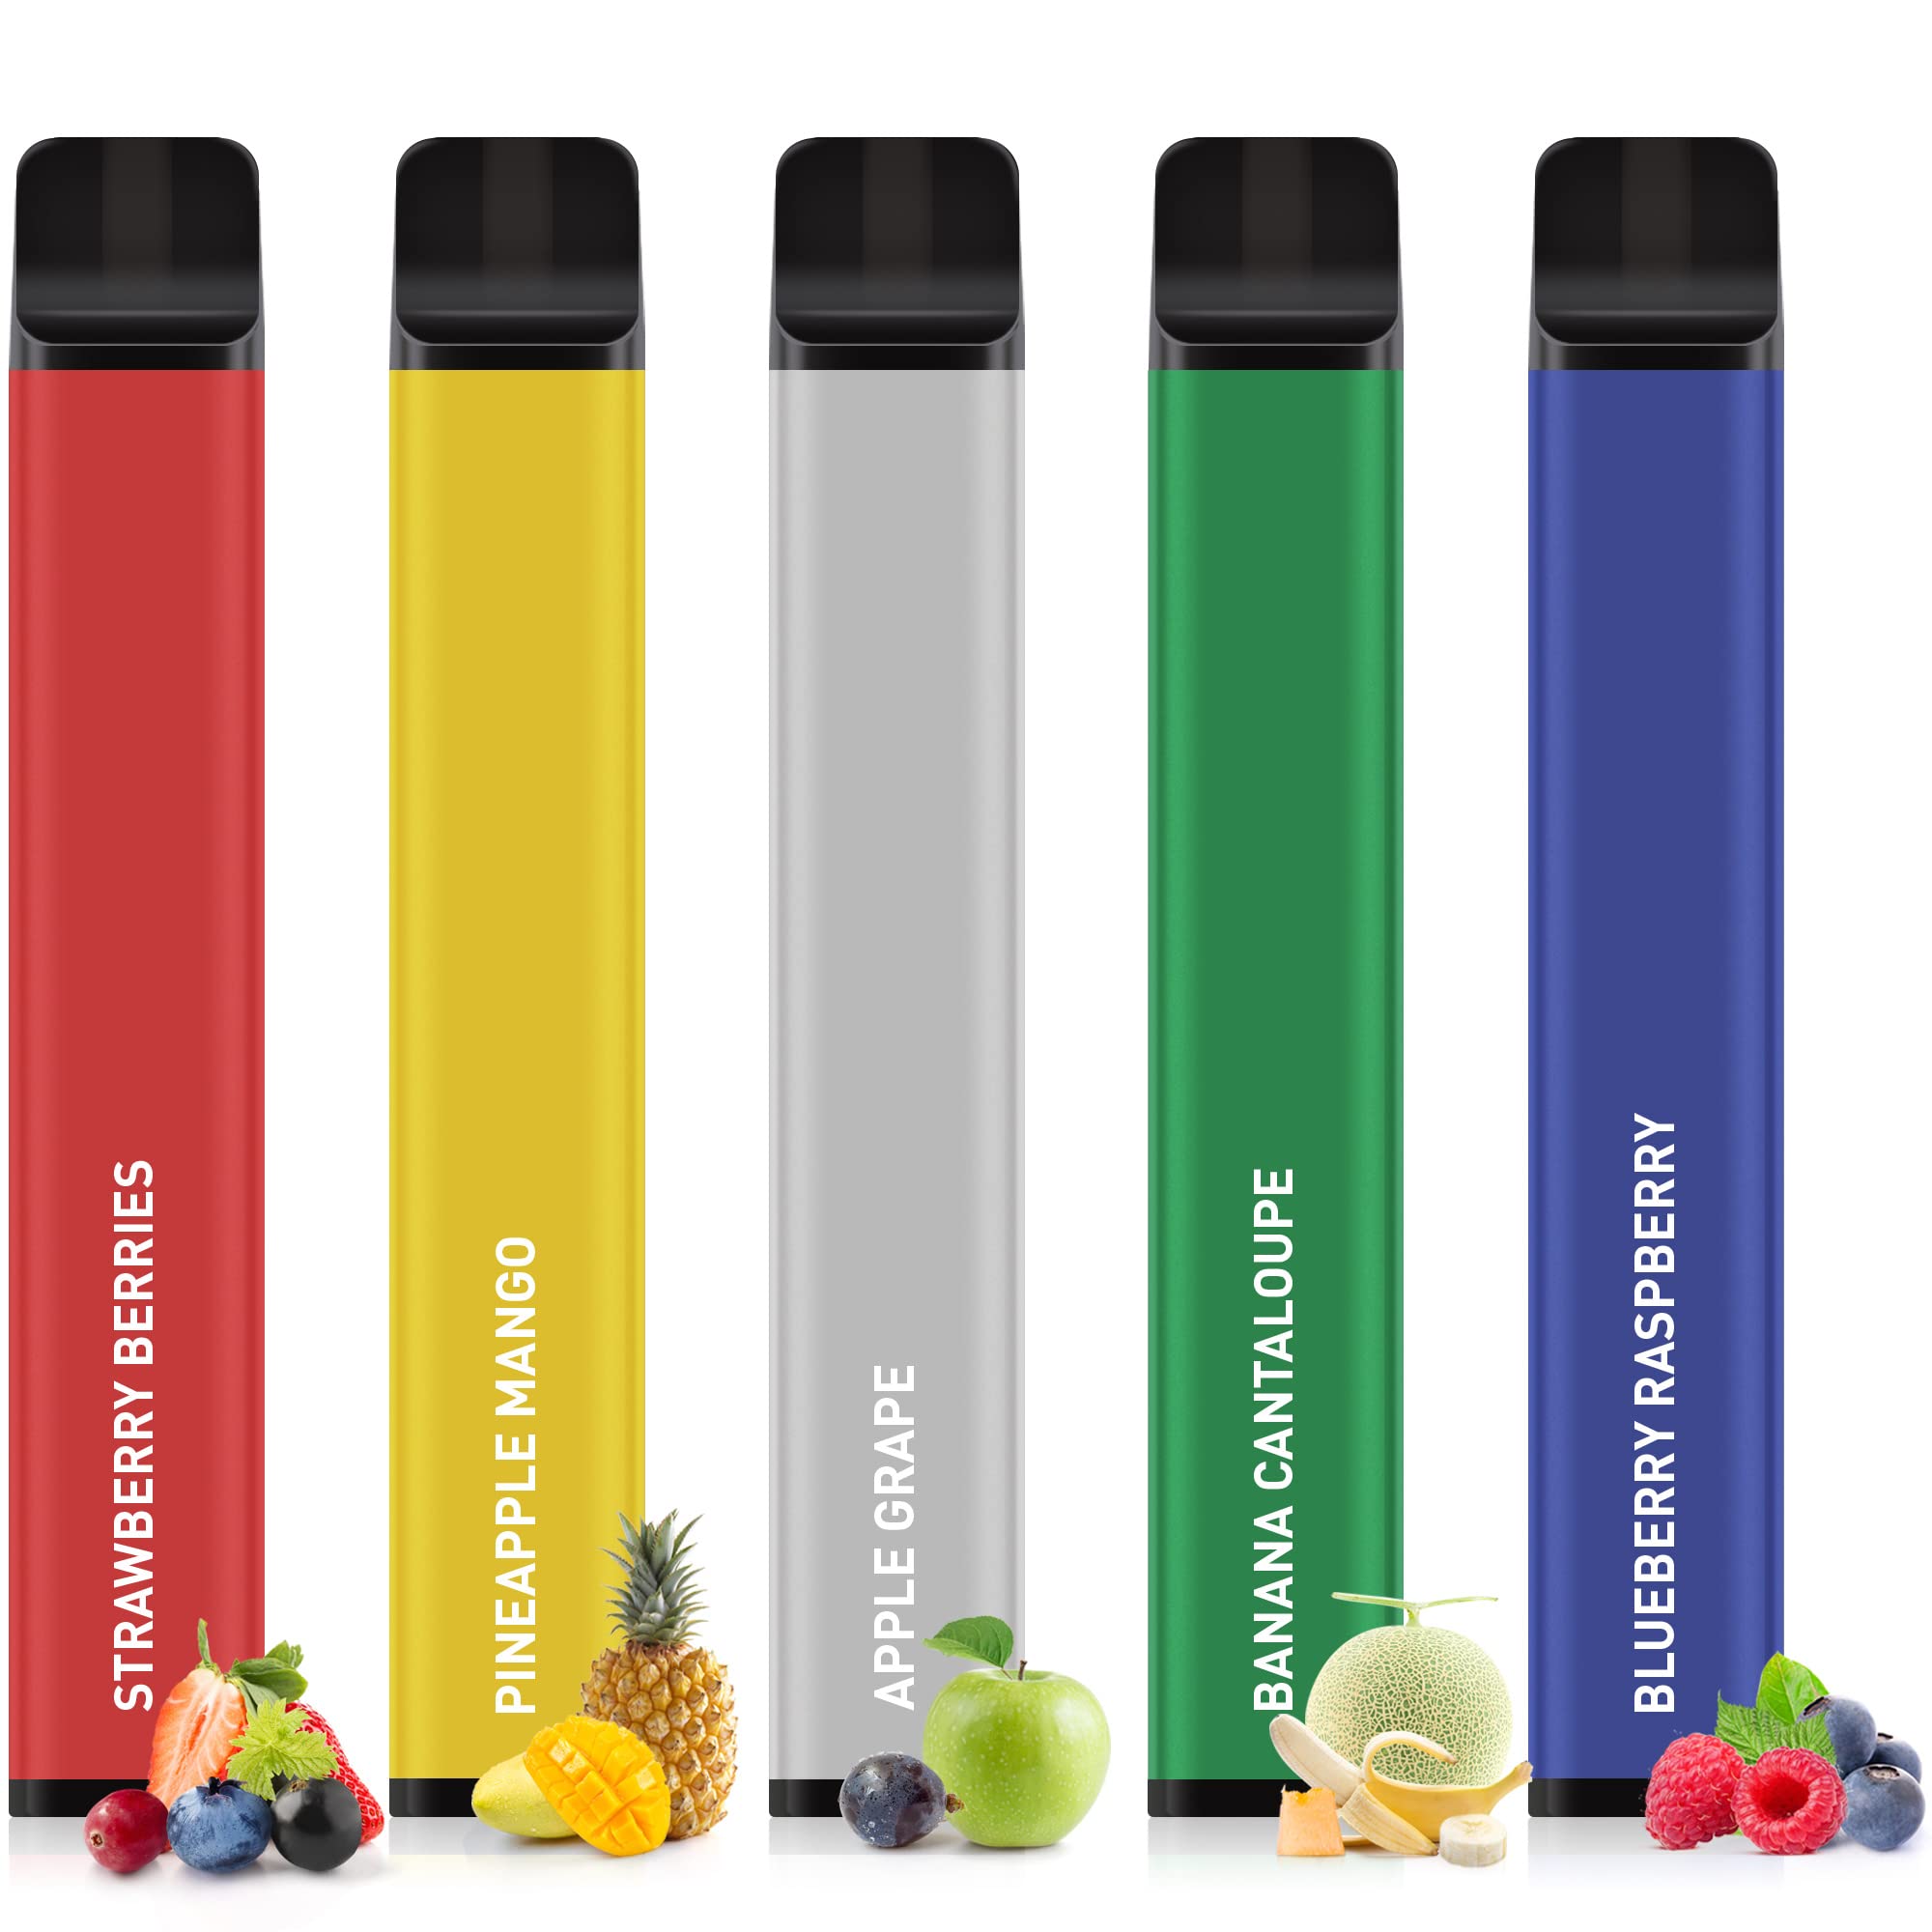 Disposable E-cigarette Bundles Convenience and Flavor in One Package